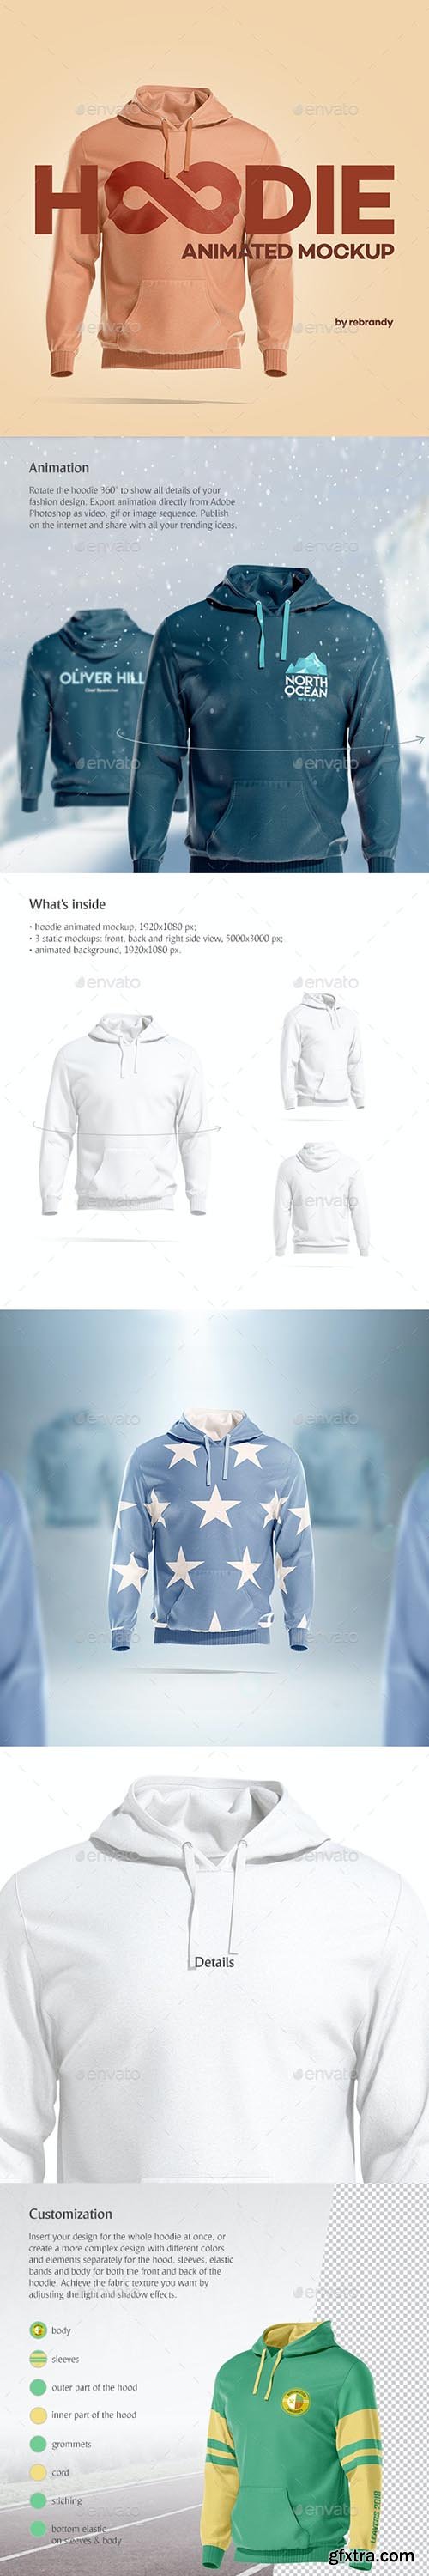 Download GraphicRiver - Hoodie Animated Mockup 29303092 » GFxtra